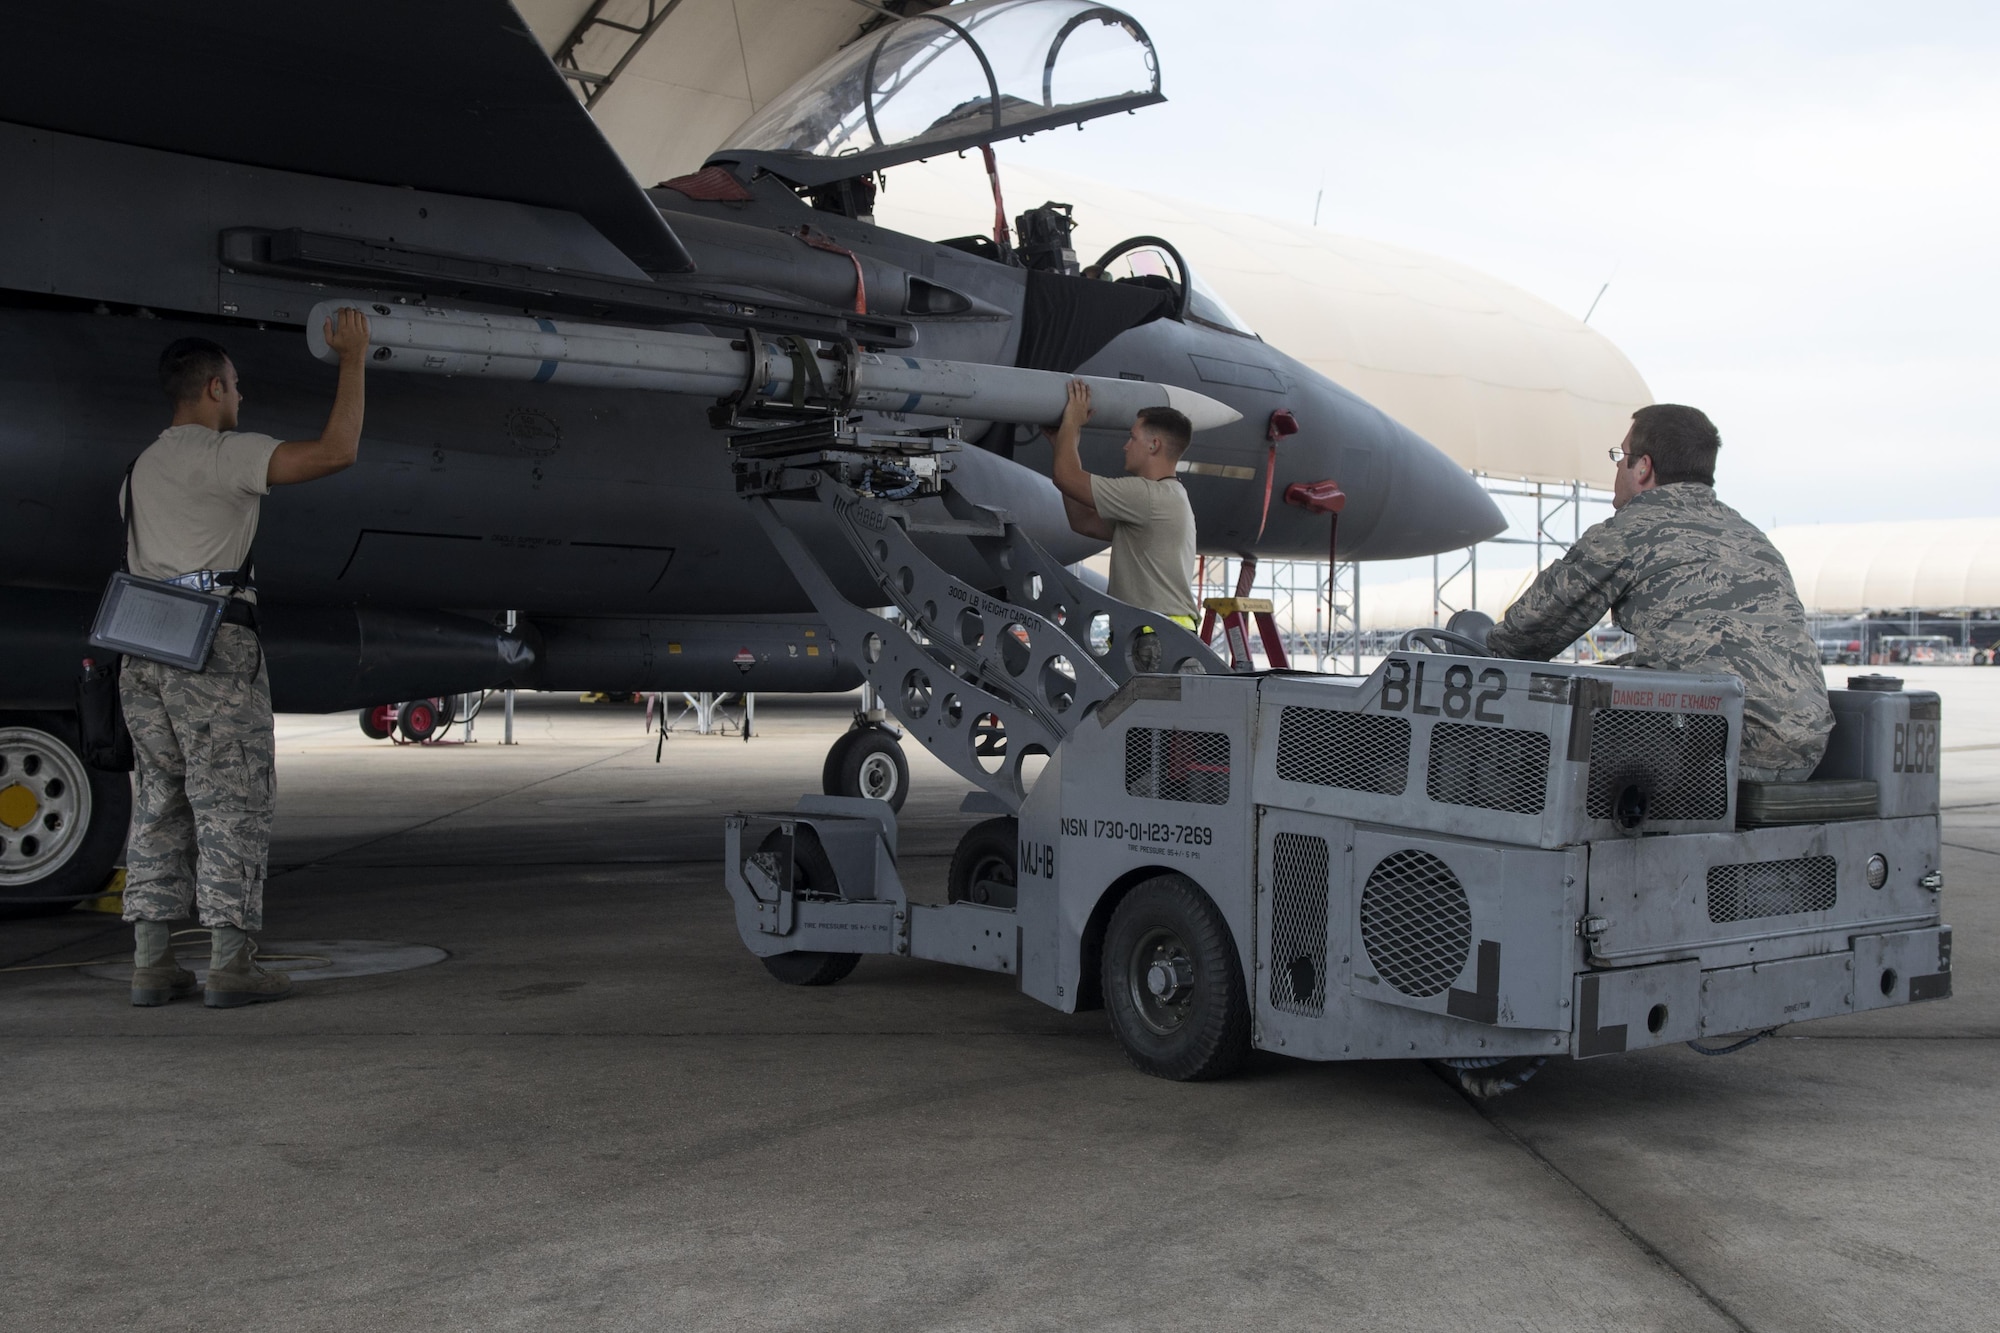 4th Aircraft Maintenance Squadron weapons load crew Airmen arm an F-15E Strike Eagle with an Aim-120 missile in preparation for exercise Combat Hammer, Aug. 3, 2017, at Seymour Johnson Air Force Base, North Carolina. F-15Es were loaded with missiles and bombs before flying to Hill Air Force Base, Utah, to participate in the exercise. (U.S. Air Force photo by Airman 1st Class Shawna L. Keyes)